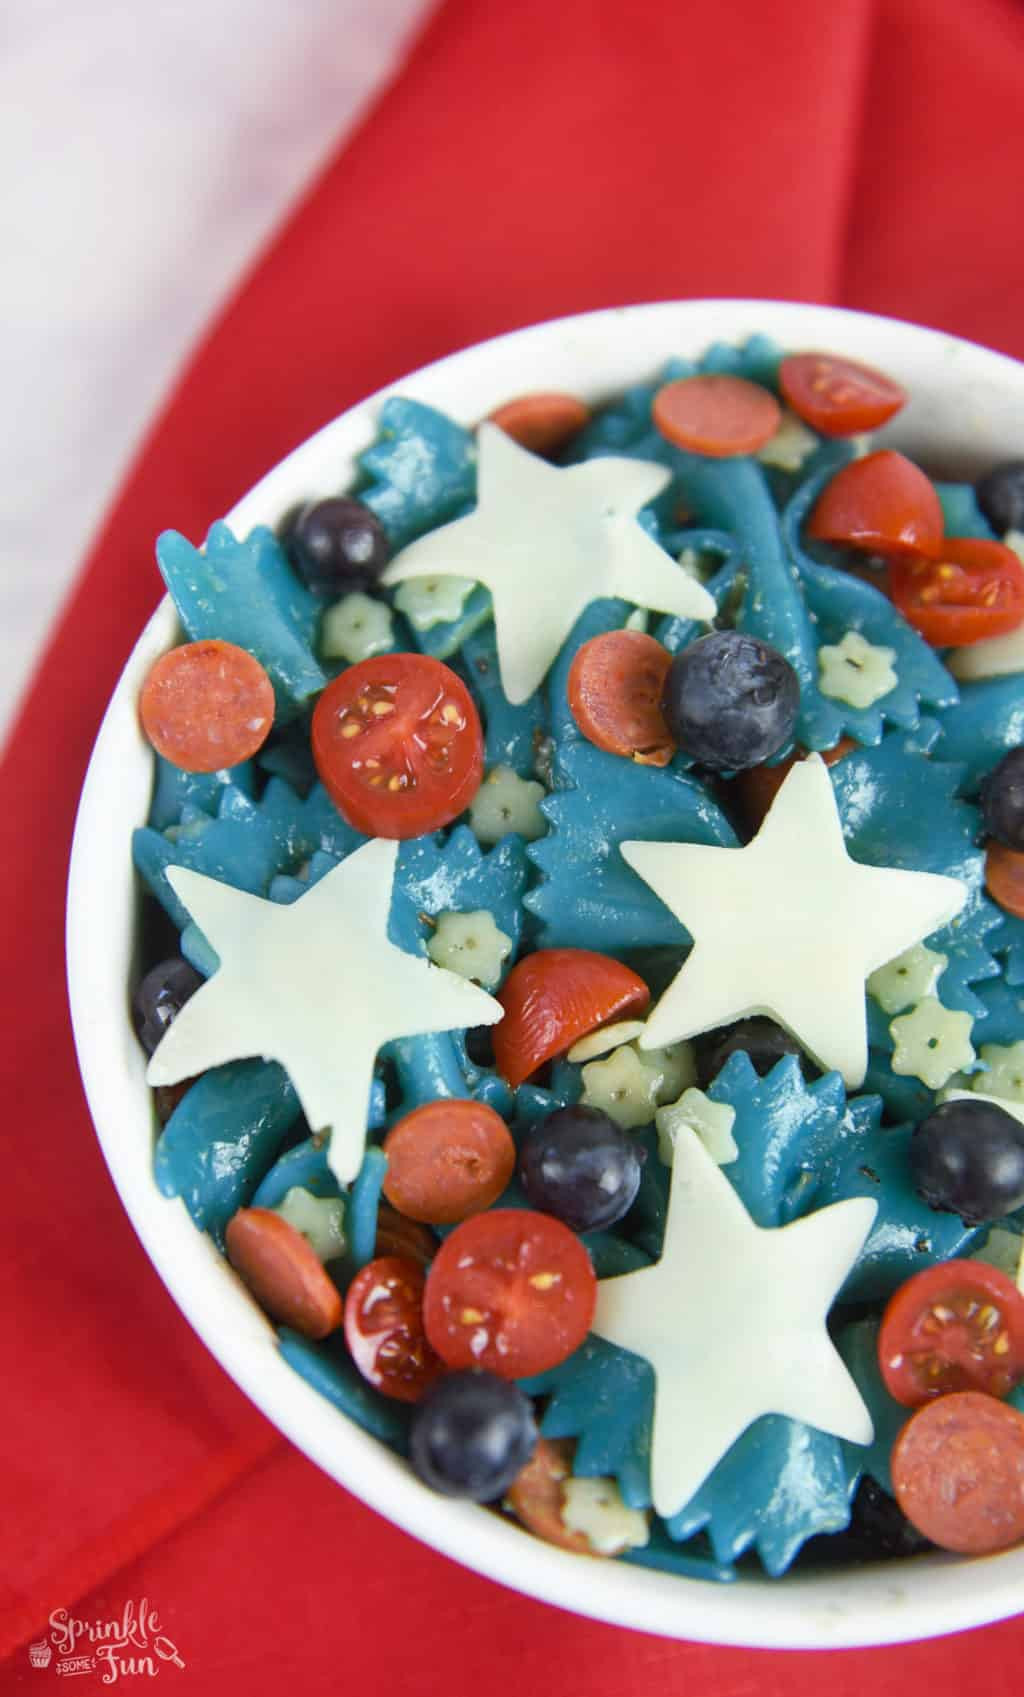 Side Dishes For 4Th Of July
 Patriotic Pasta Salad Sprinkle Some Fun